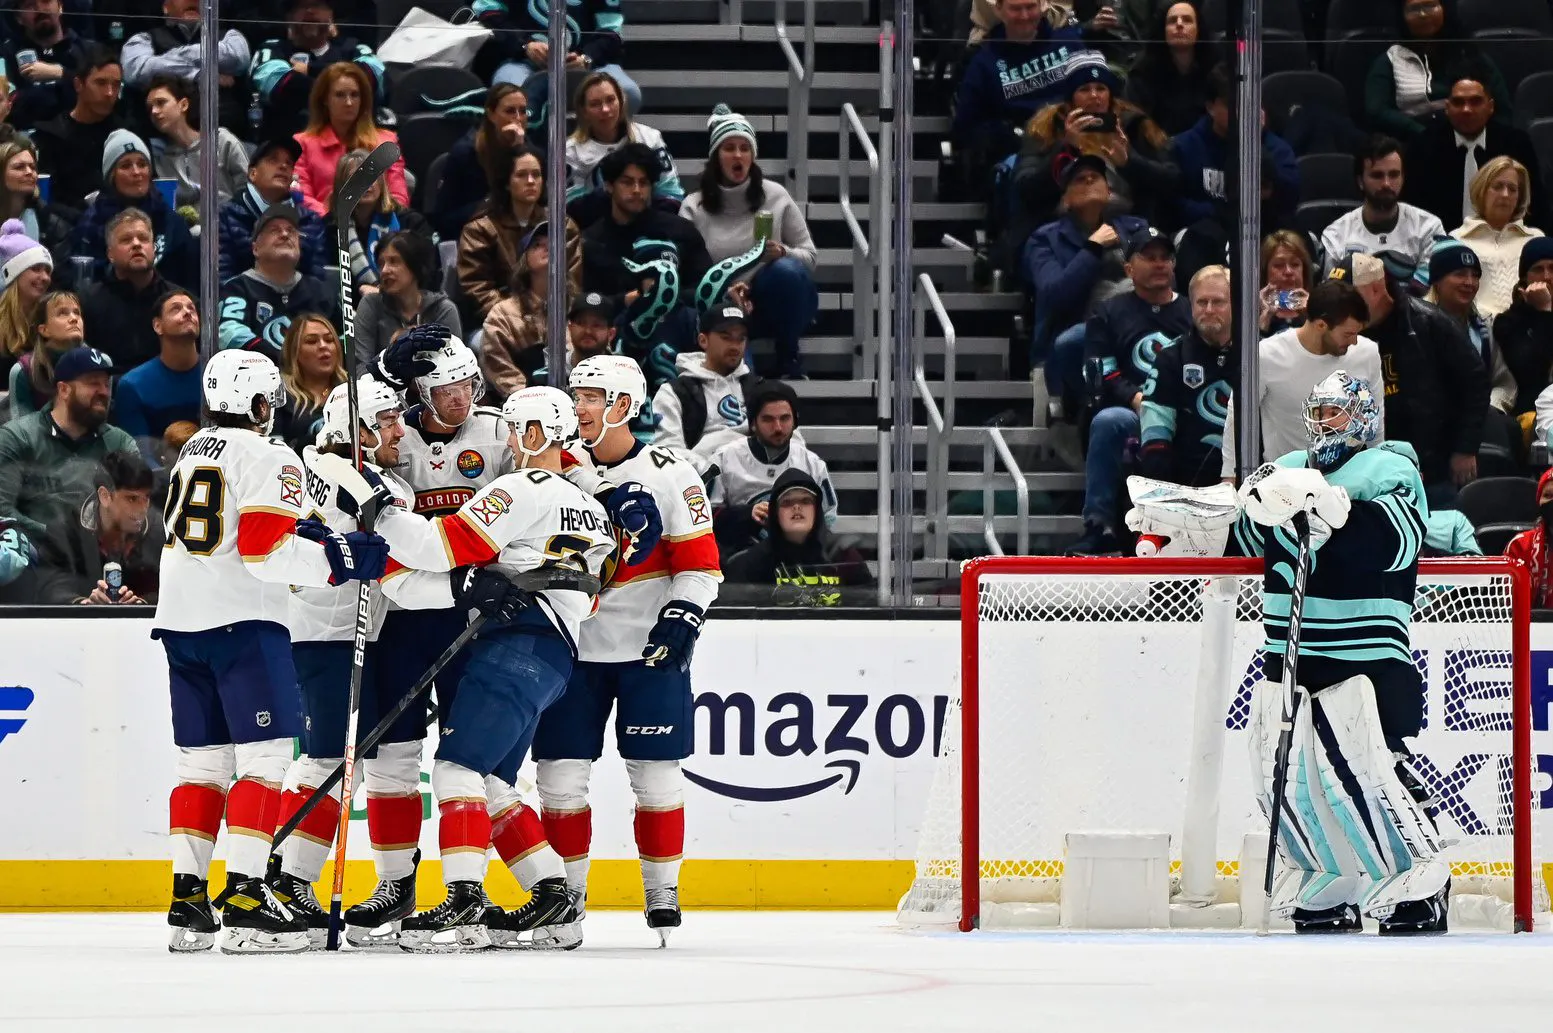 NHL Power Rankings: Florida Panthers claw their way back into the top 10